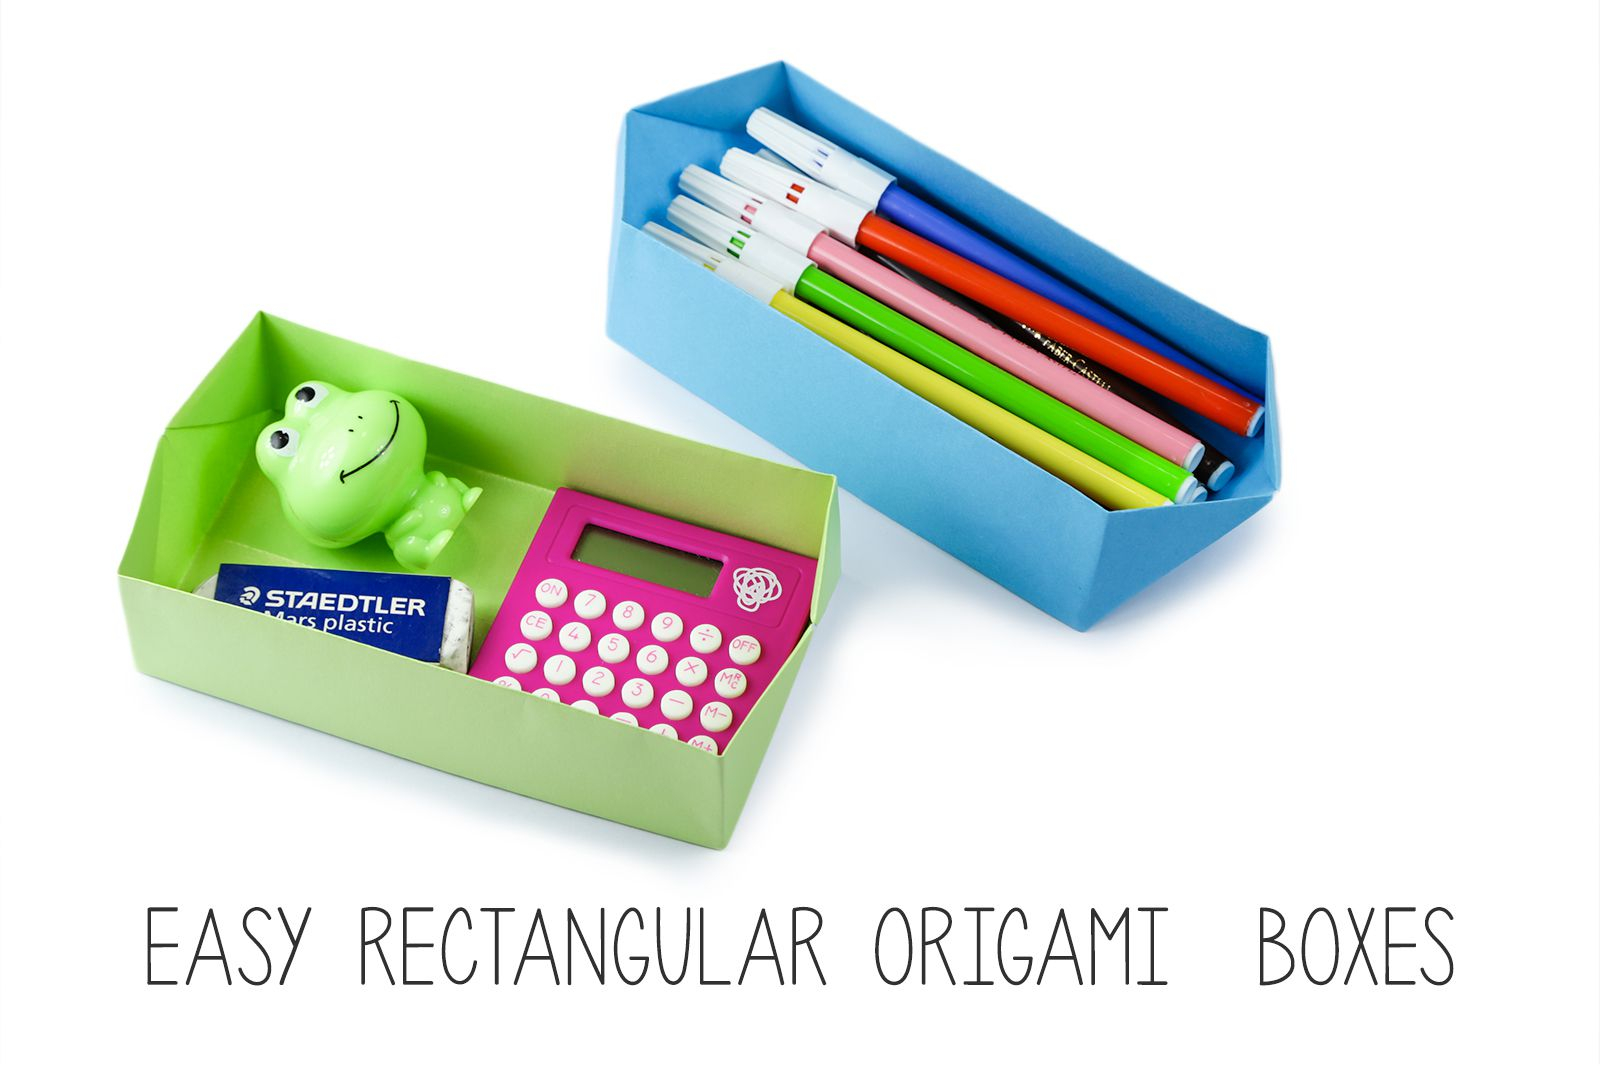 Simple Origami Bowl Easy Rectangle Origami Box Instructions